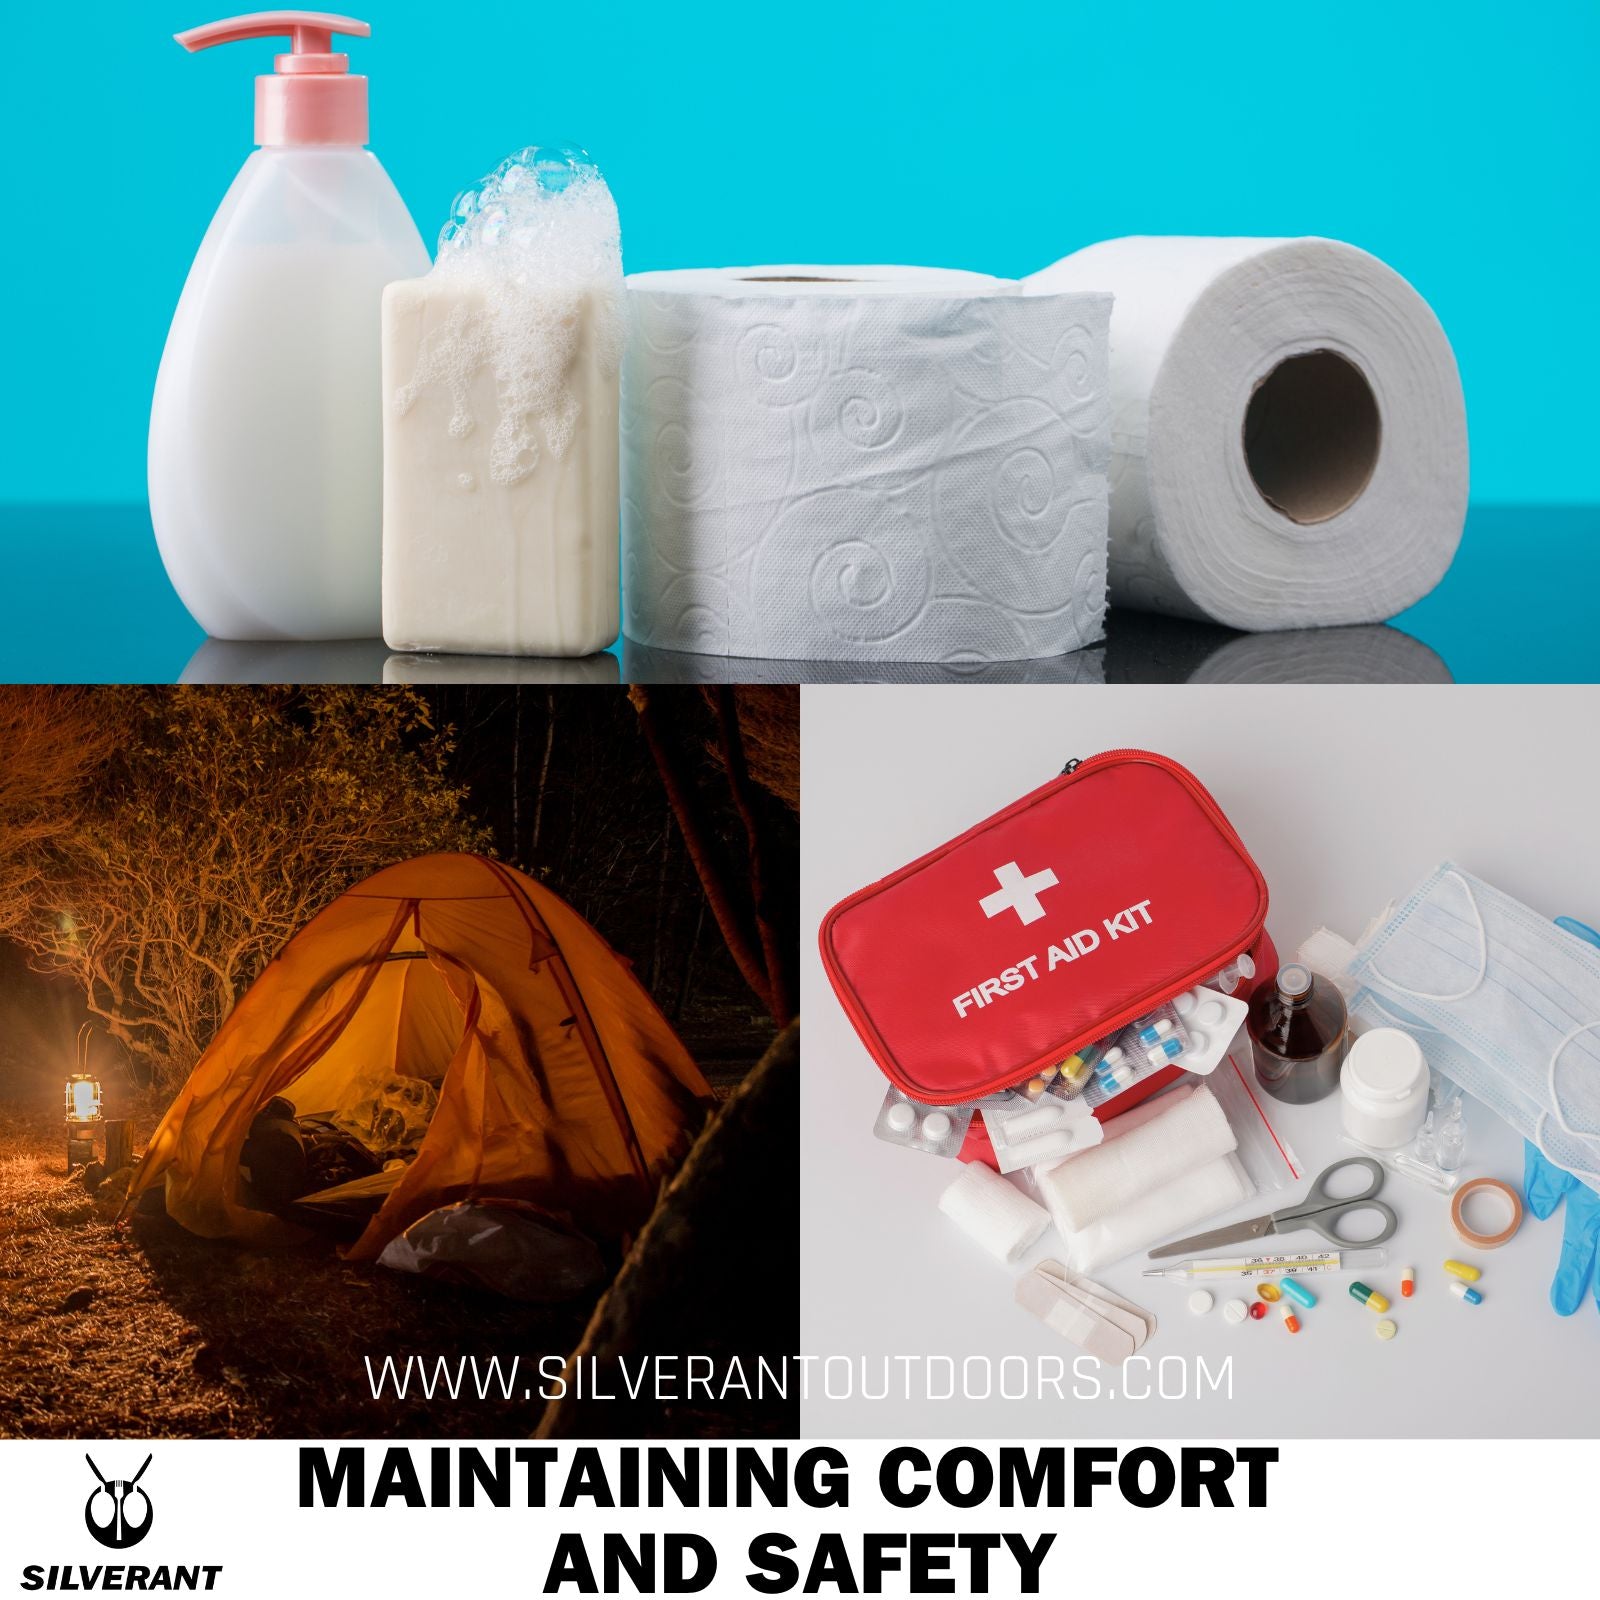 Maintaining Comfort and Safety in Ultralight Backpacking